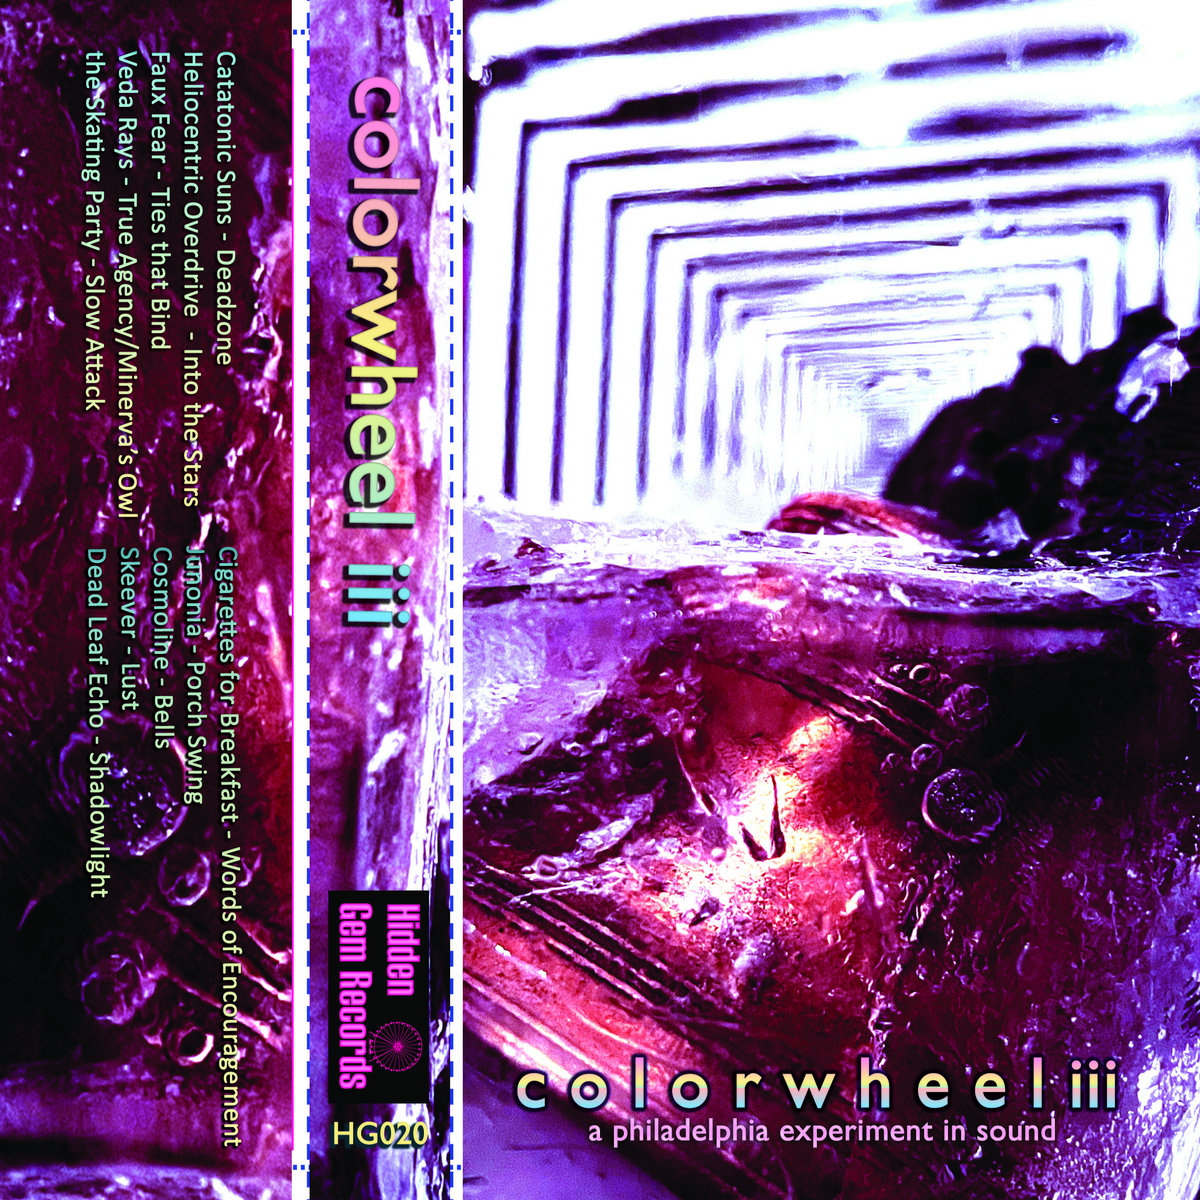 14. NOW PLAYING ON THE SHOEGAZE COLLECTIVE RADIO SHOW ON DKFM: TSC SHOW: 272 CCLXXII: 5/14 /24 - DEAD LEAF ECHO - 'SHADOWLIGHT' - 2024.